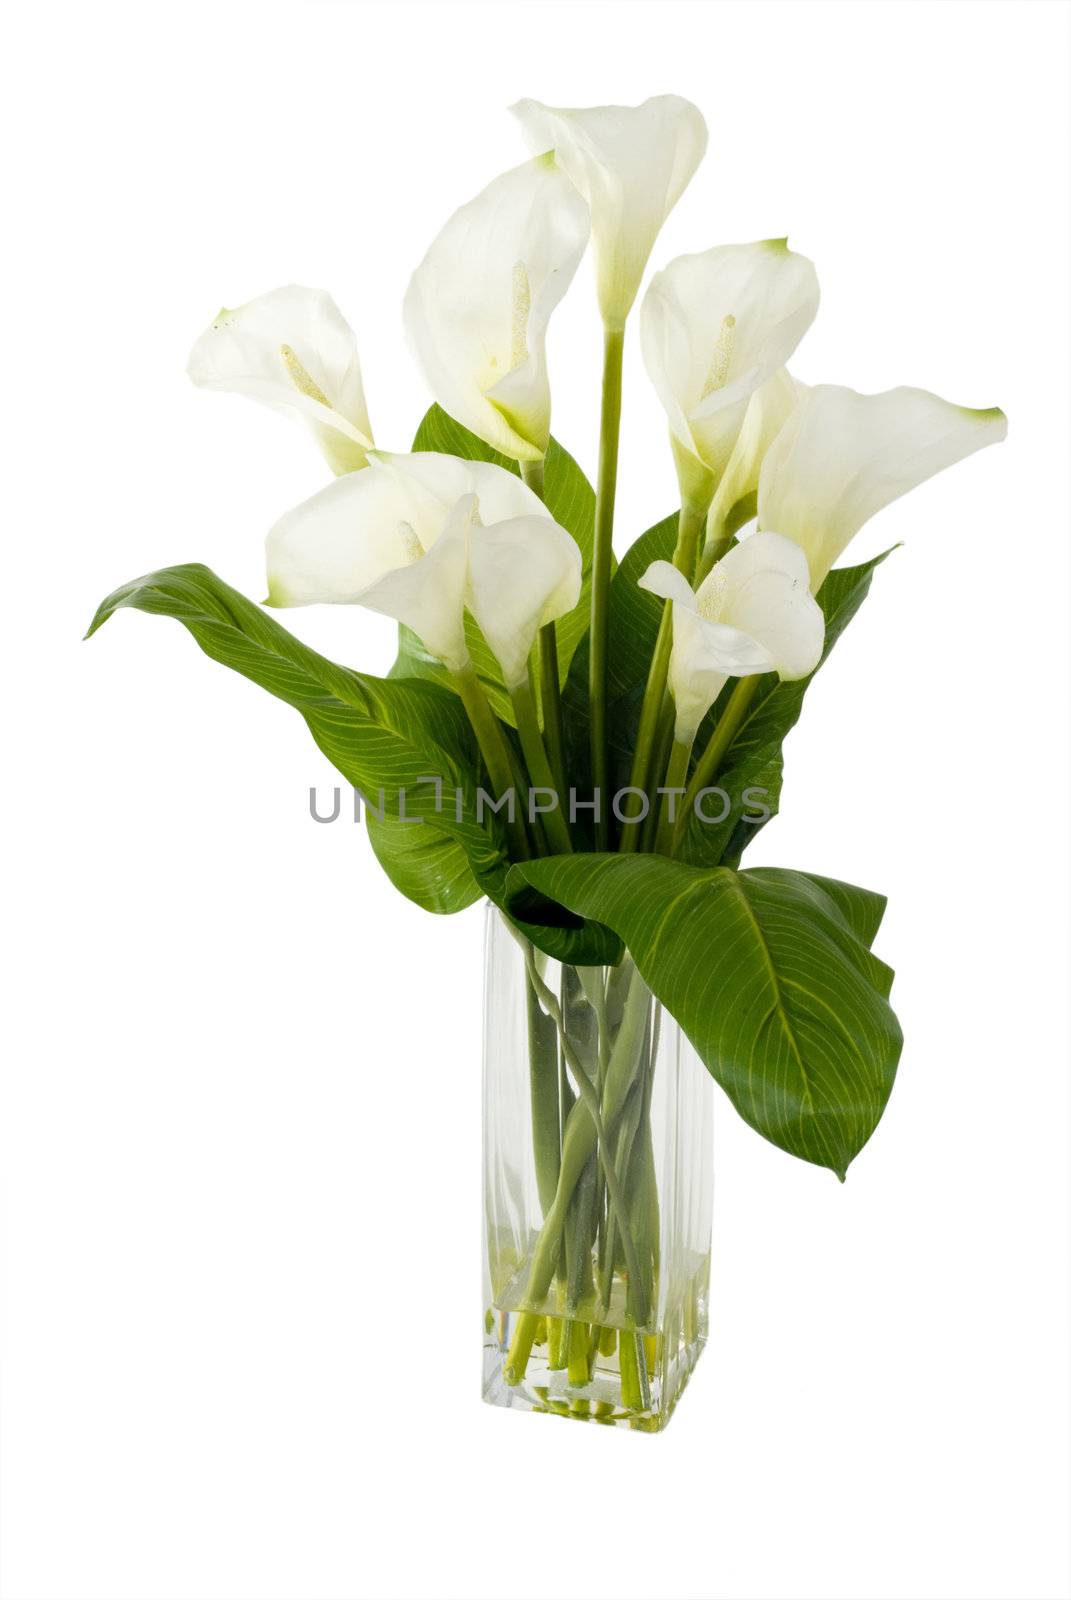 A green plant in a vase on an isolated background.